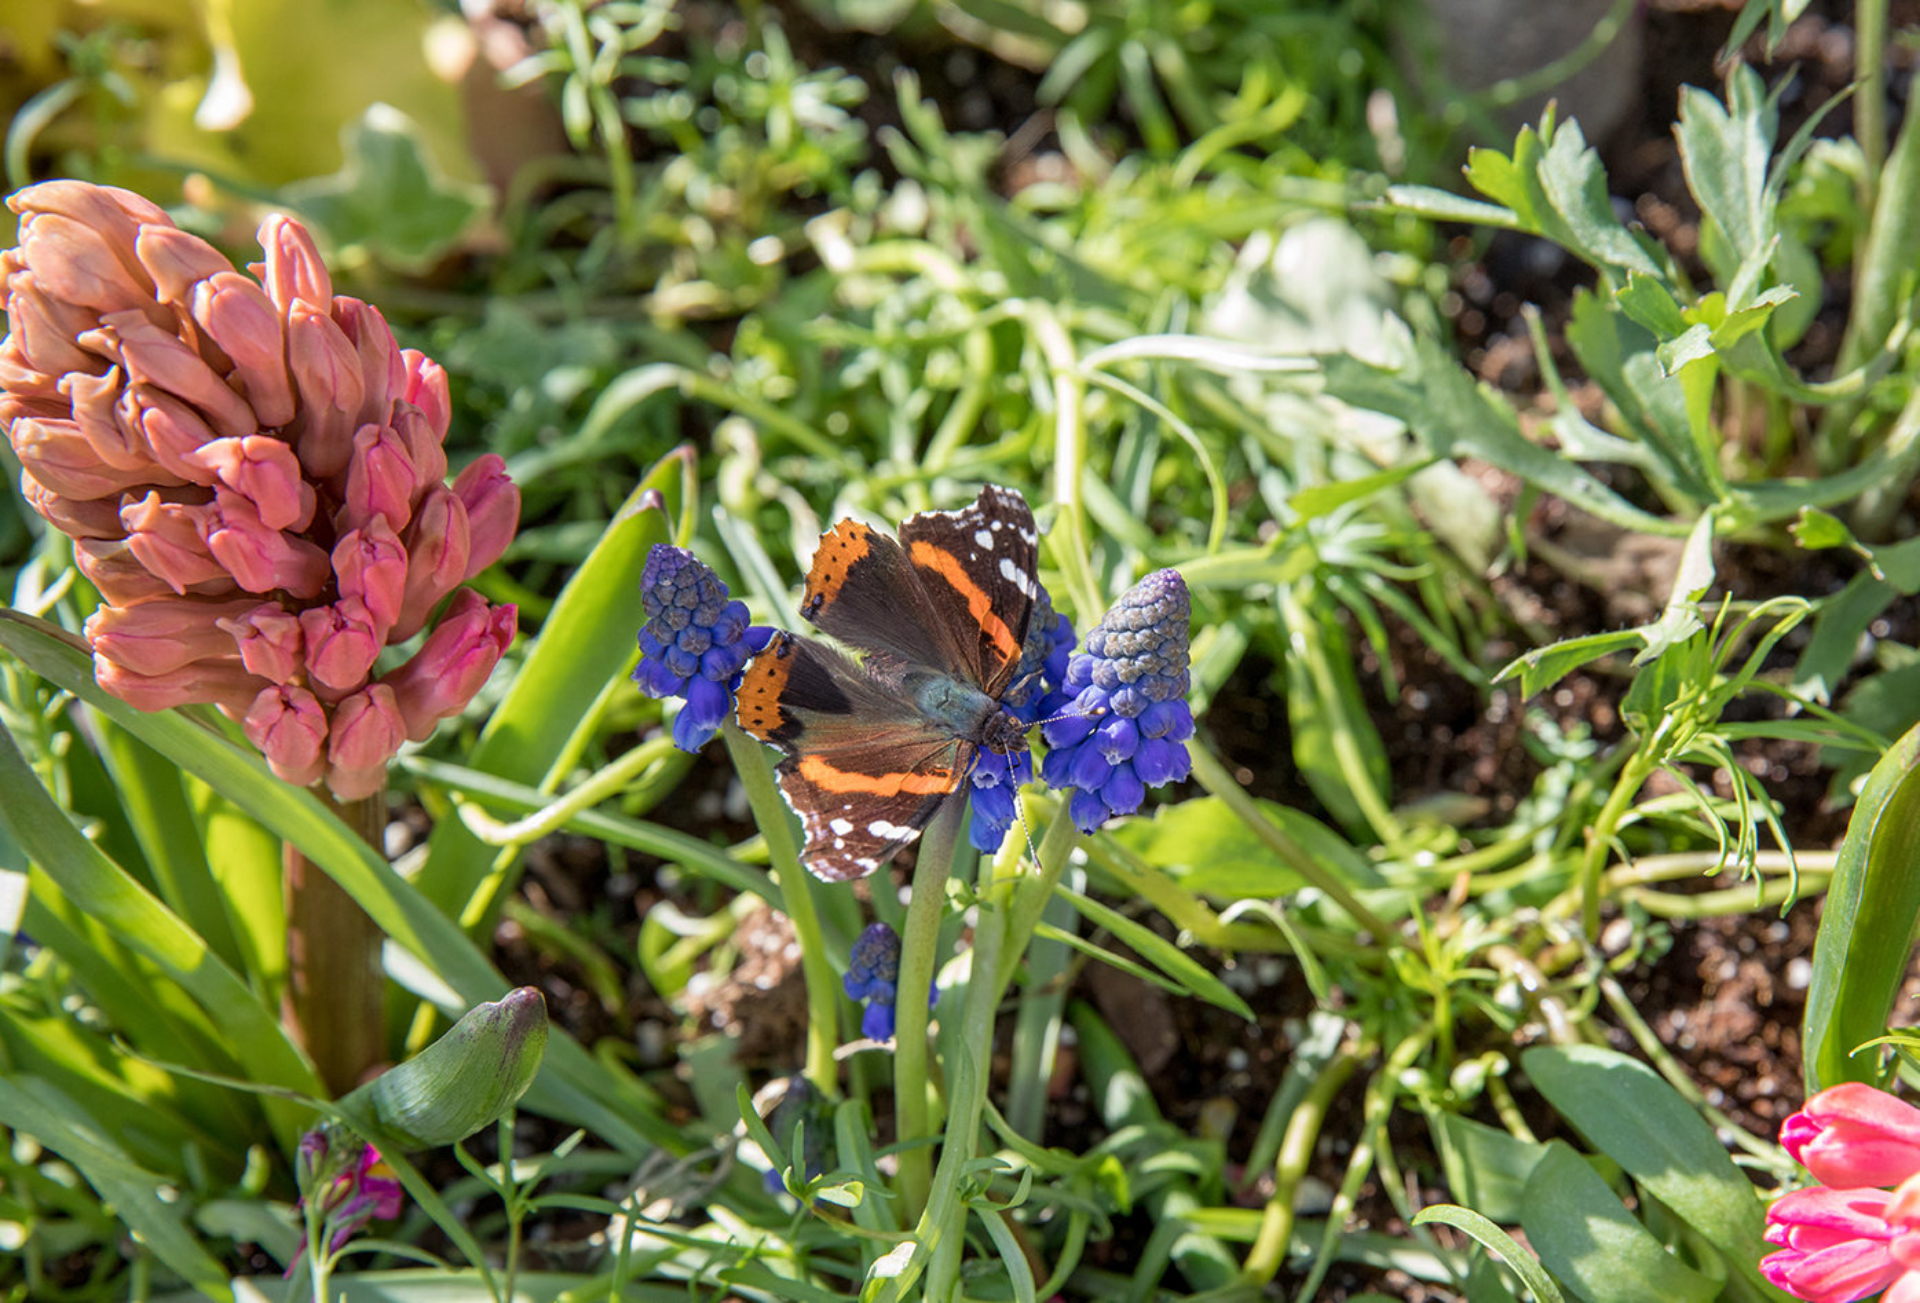 A butterfly resting on a spring flower